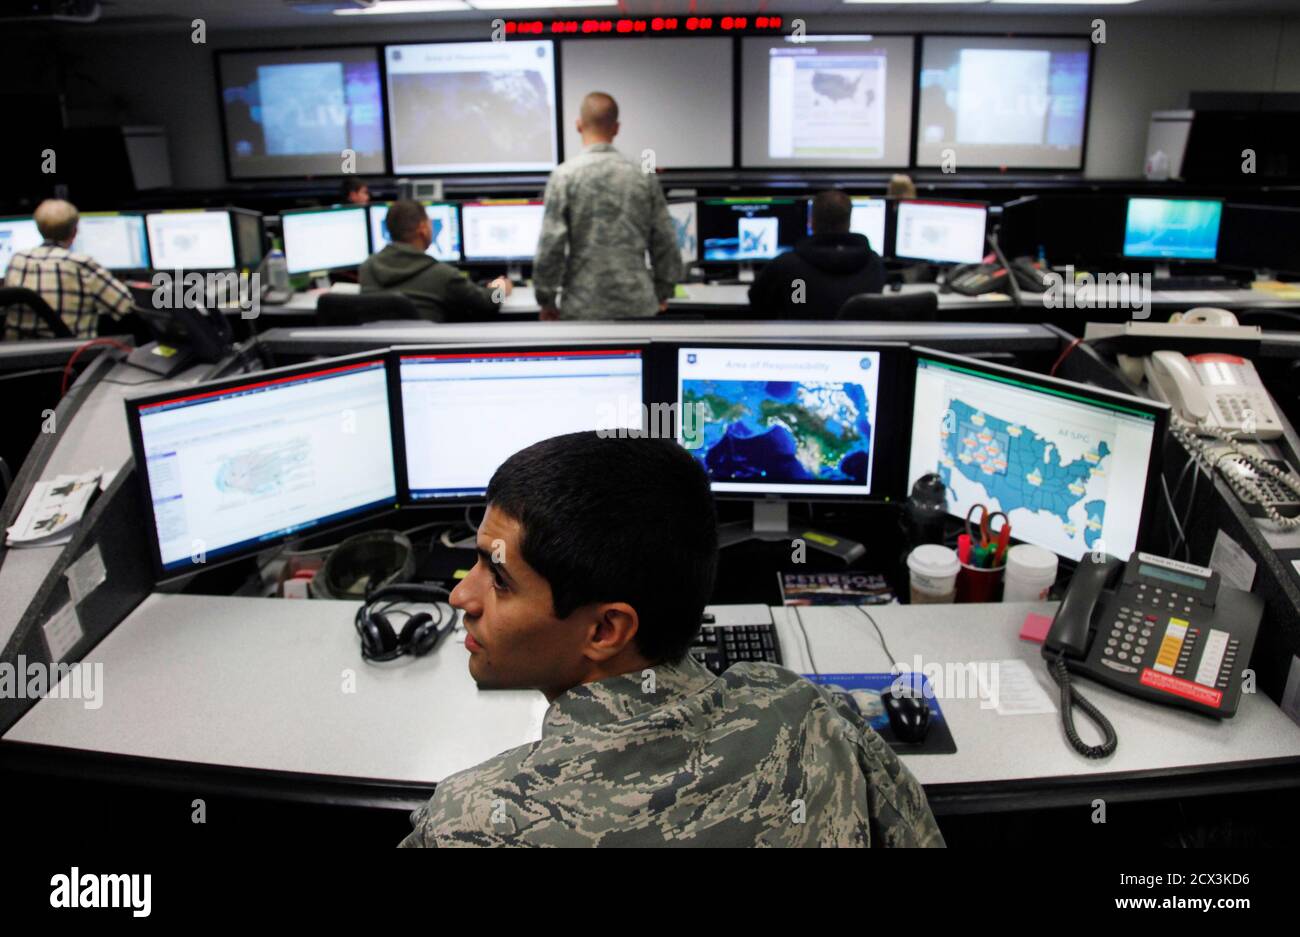 2Lt William Liggett works at the Air Force Space Command Network Operations & Security Center at Peterson Air Force Base in Colorado Springs, Colorado July 20, 2010. U.S. national security planners are proposing that the 21st century's critical infrastructure -- power grids, communications, water utilities, financial networks -- be similarly shielded from cyber marauders and other foes. The ramparts would be virtual, their perimeters policed by the Pentagon and backed by digital weapons capable of circling the globe in milliseconds to knock out targets.  To match Special Report  USA-CYBERWAR/  Stock Photo